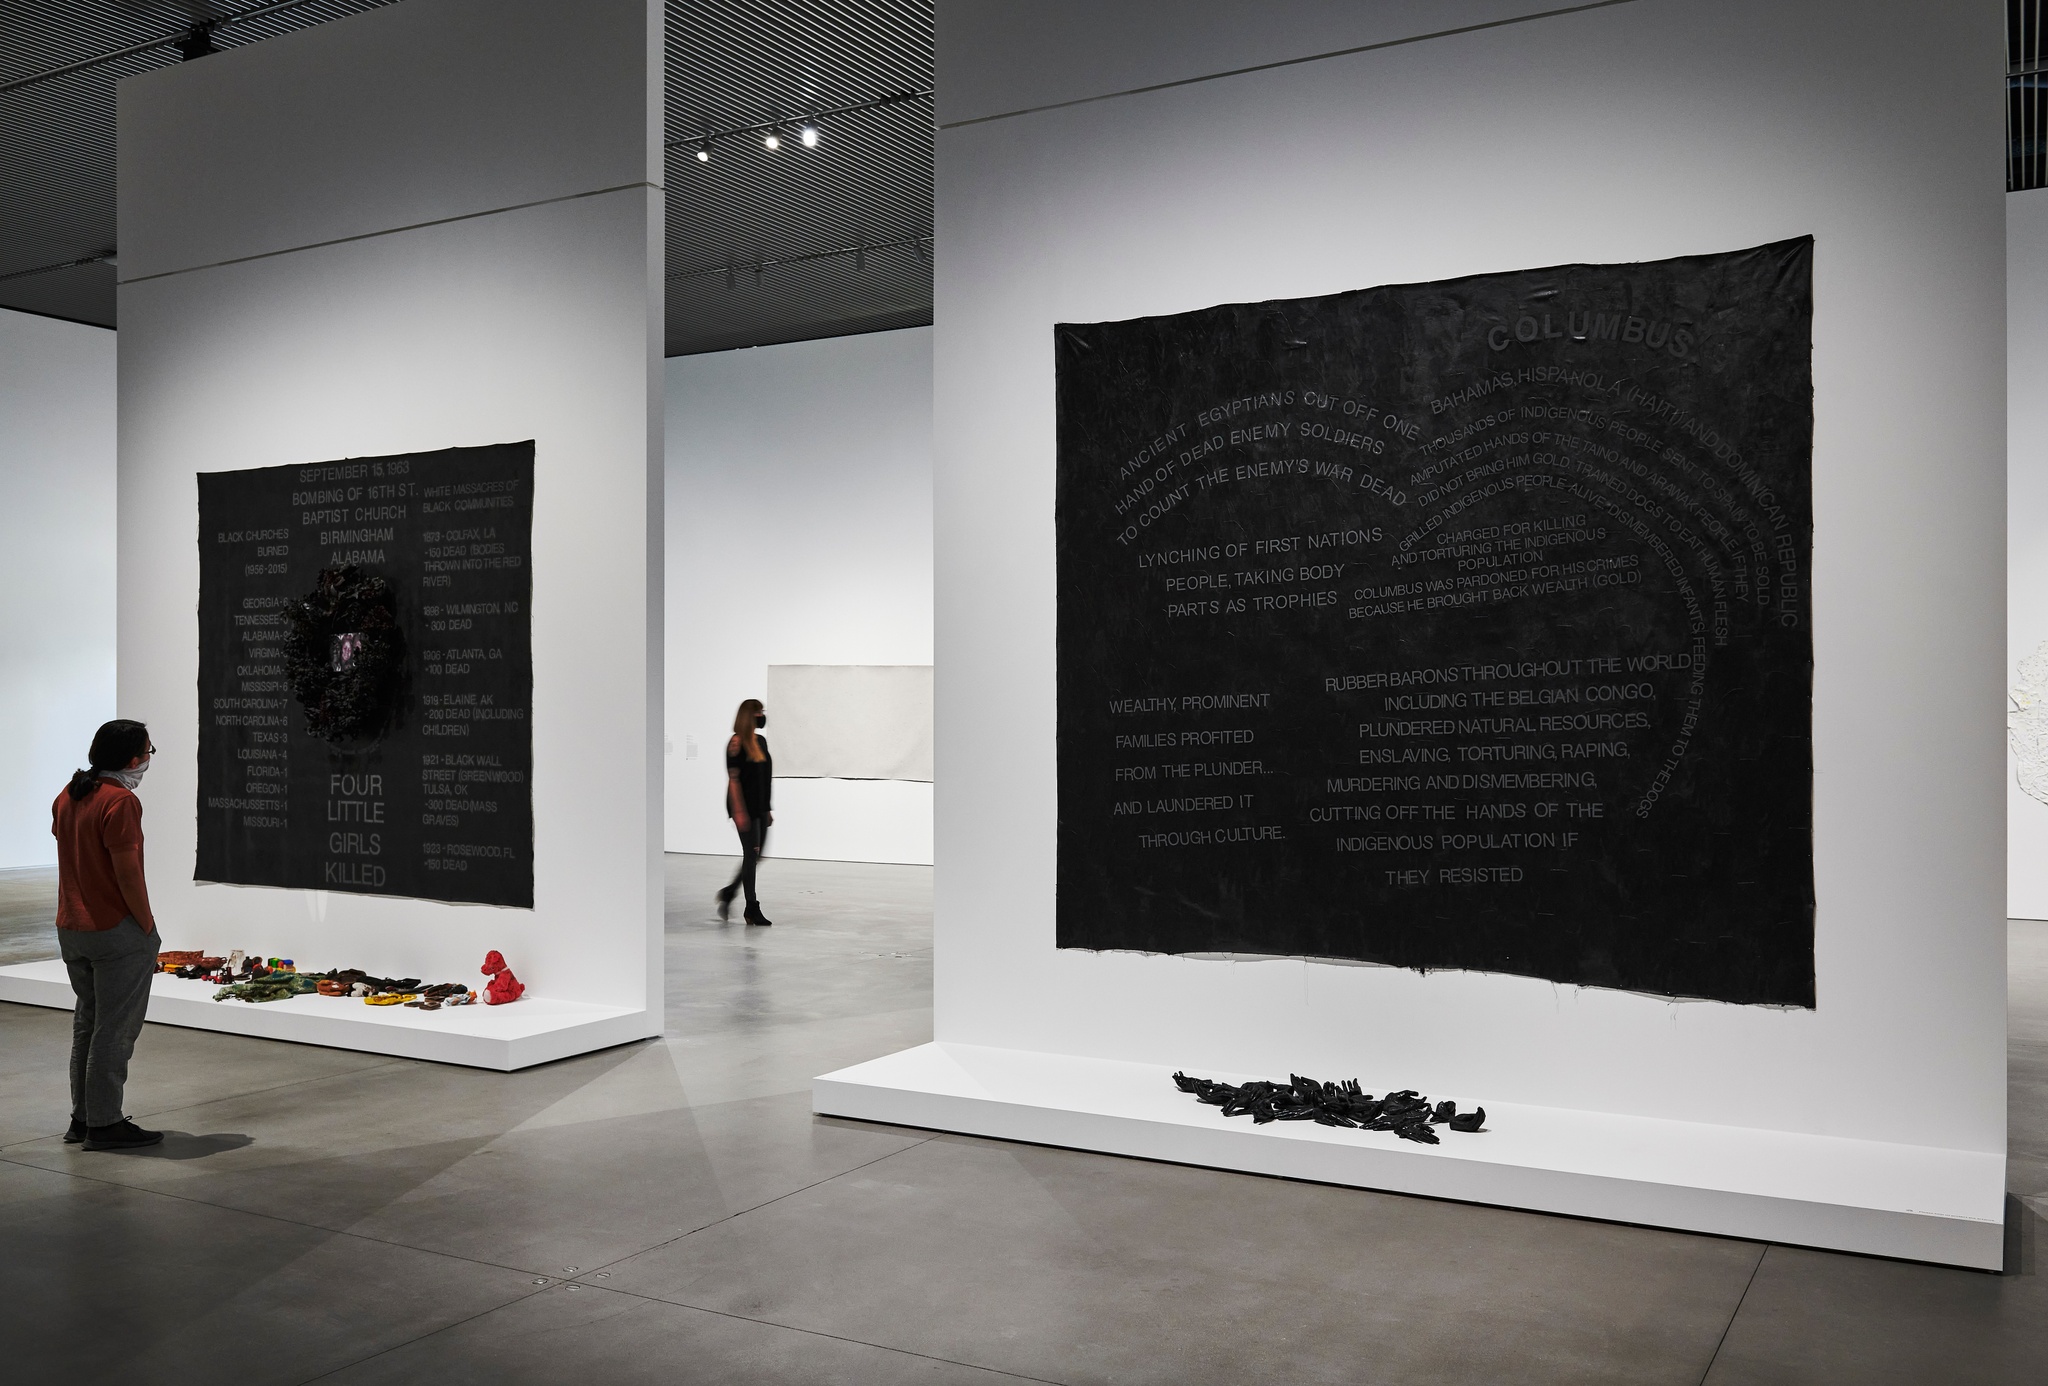 An installation view of two thematic paintings in the exhibition Howardena Pindell: Rope/Fire/Water. A gallery visitor looks at two square black paintings on adjacent walls while another visitor crosses the space in the background. The black paintings have text applied to their surfaces and objects arranged at their bases.